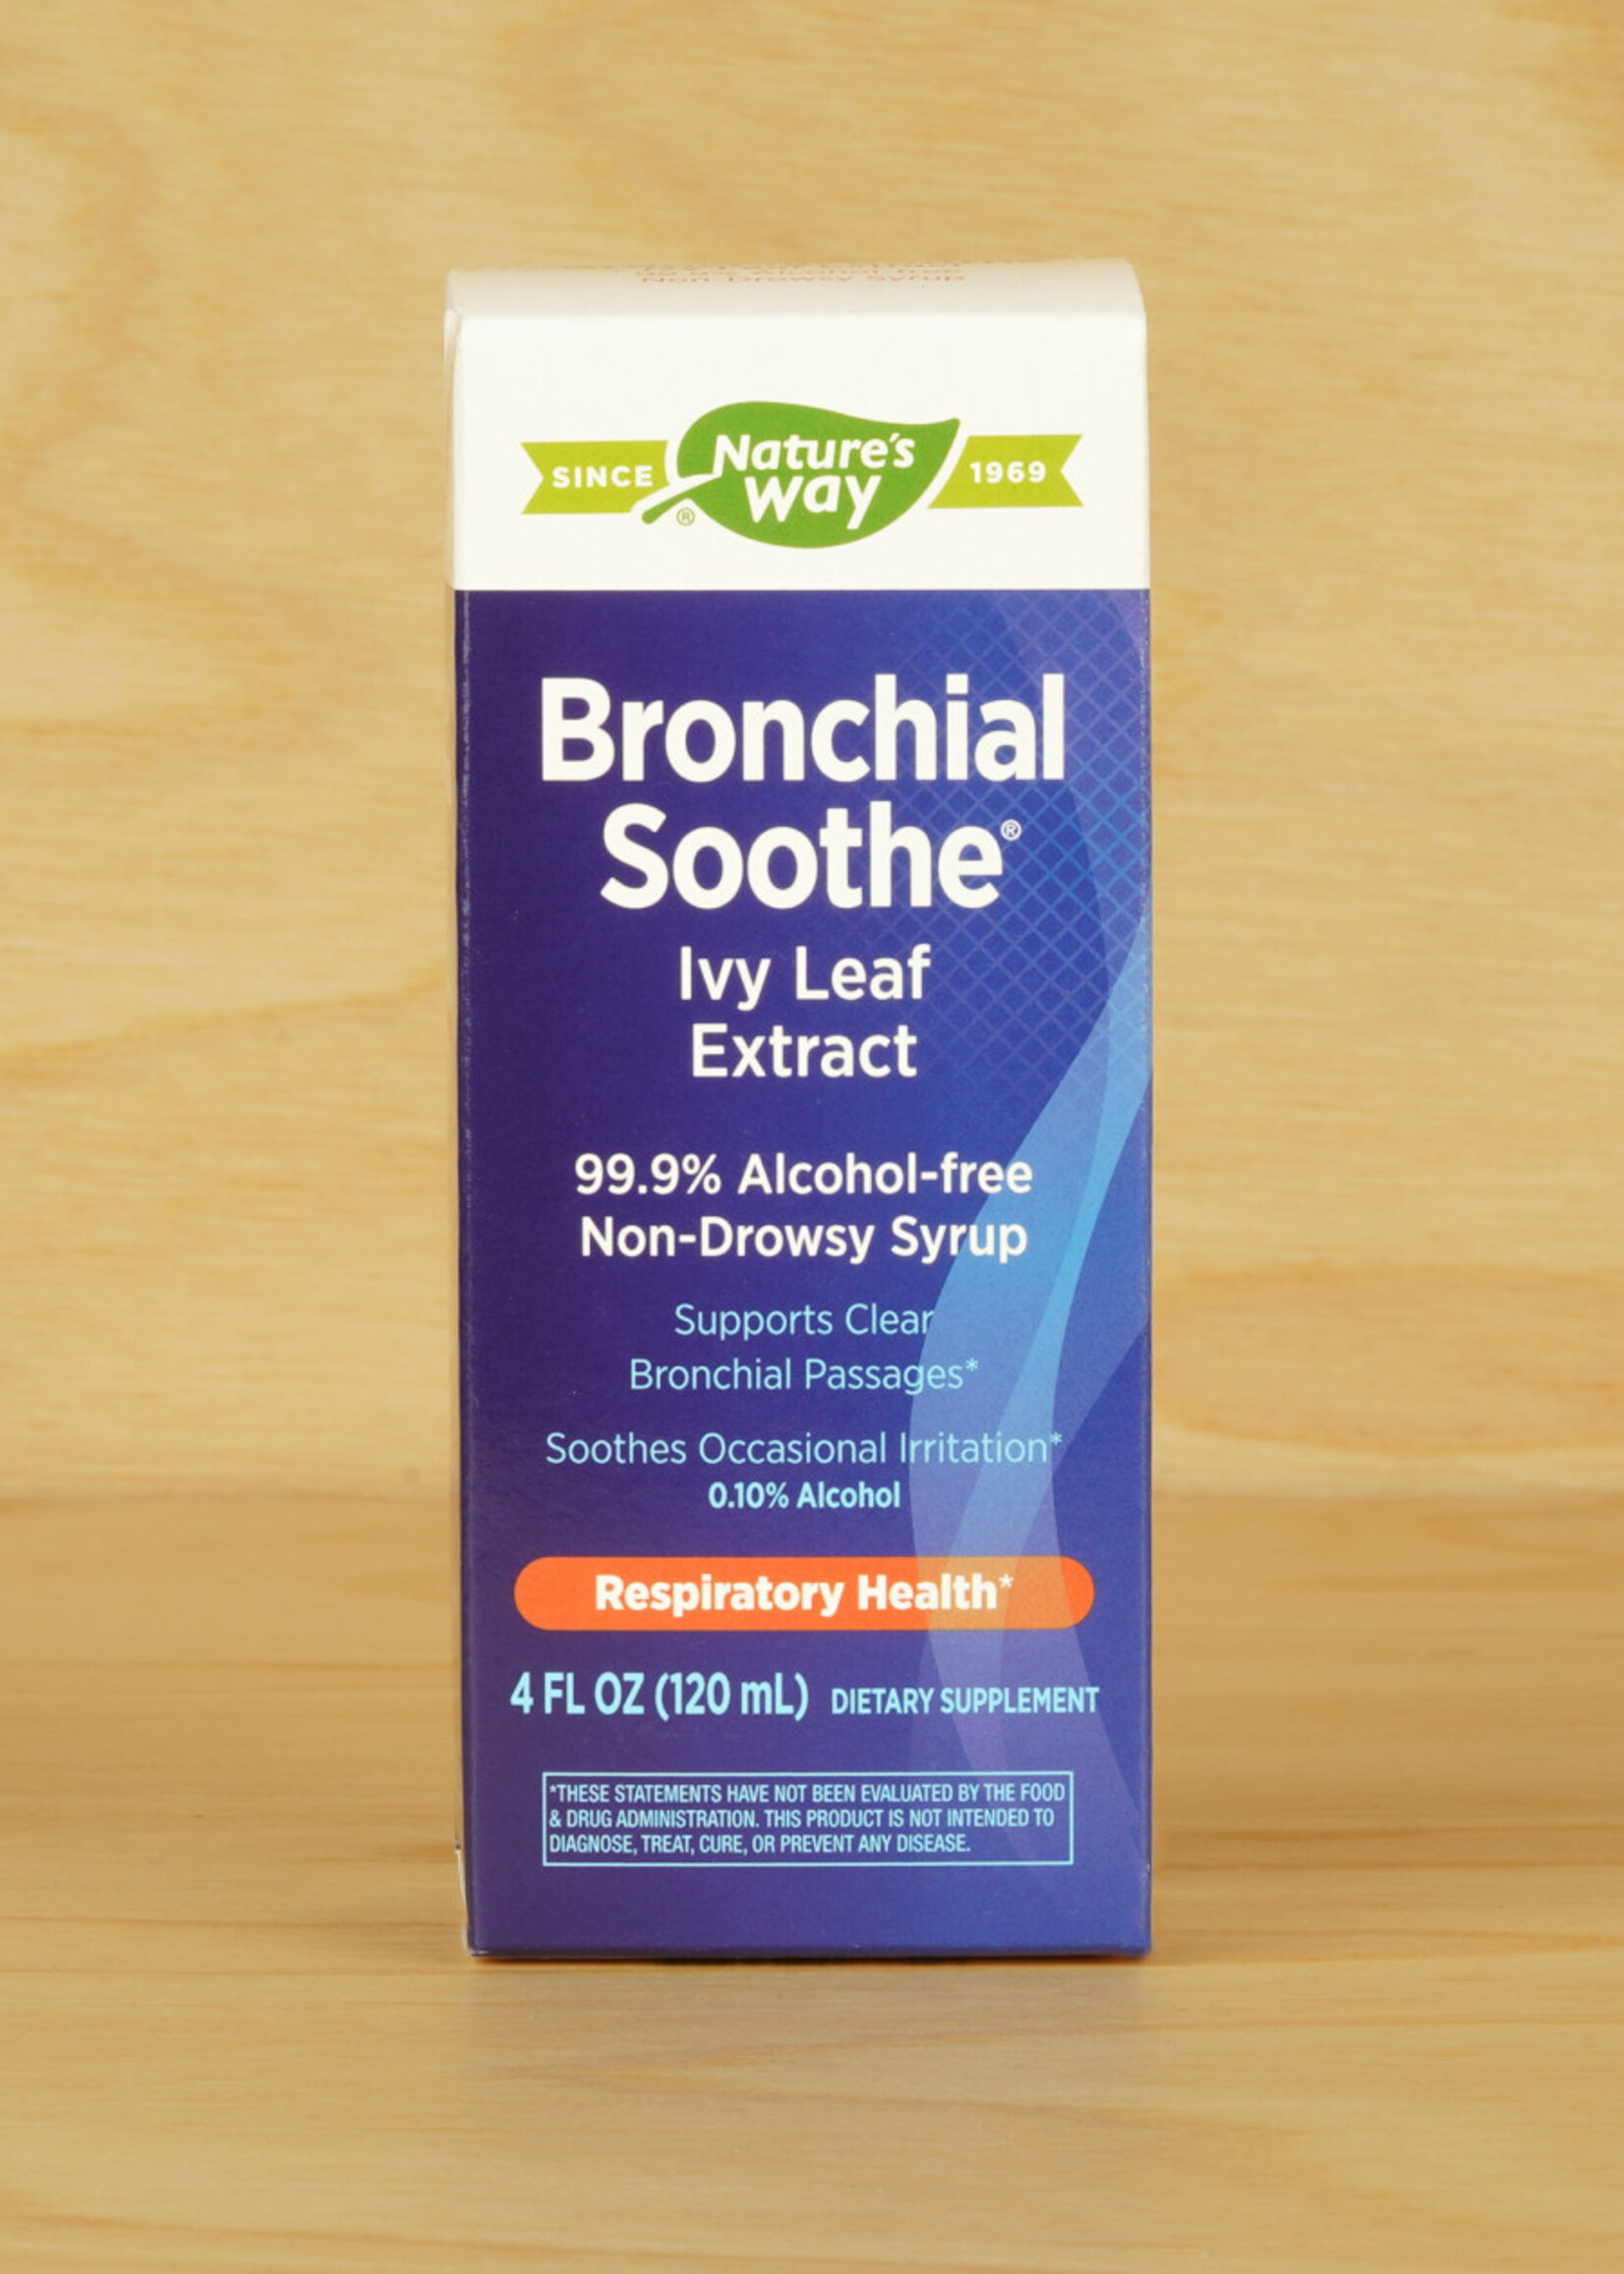 Nature's Way Nature's Way Bronchial Soothe